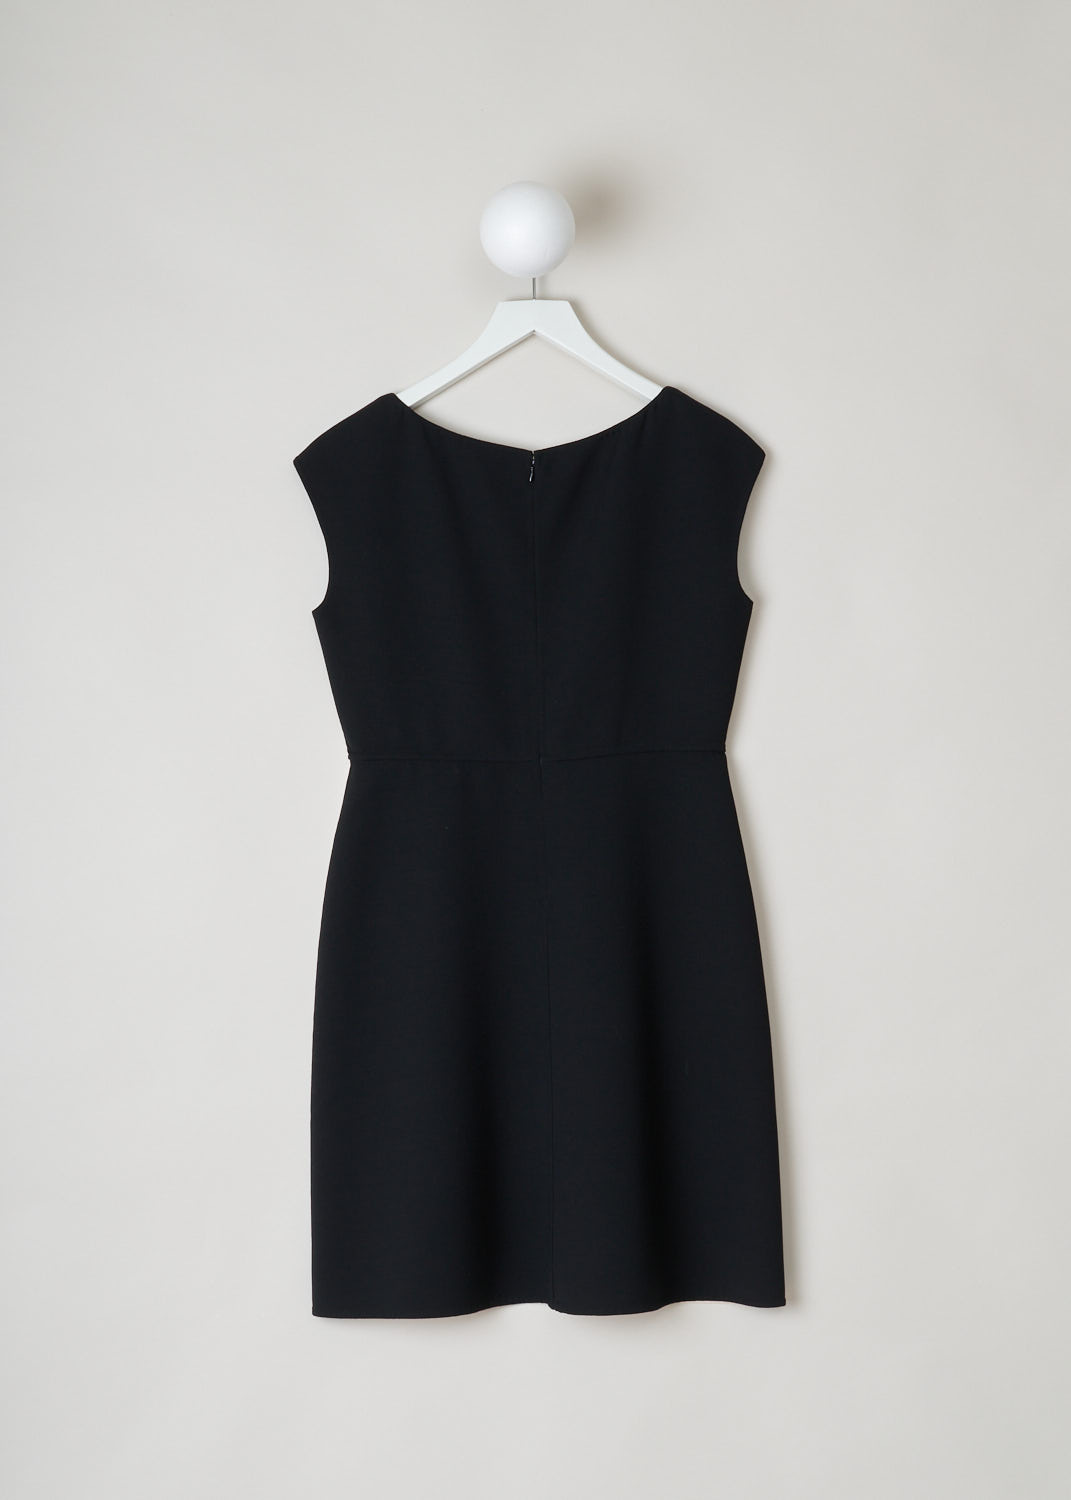 Prada, A-line dress in white with black, natte_double_B_P399T_F0N_nero_talco, black white, back, Midi length black and white A-line dress. Black on the back, and from the chest down white. Featuring a scoop neckline, no sleeves and a concealed zipper on the back. 